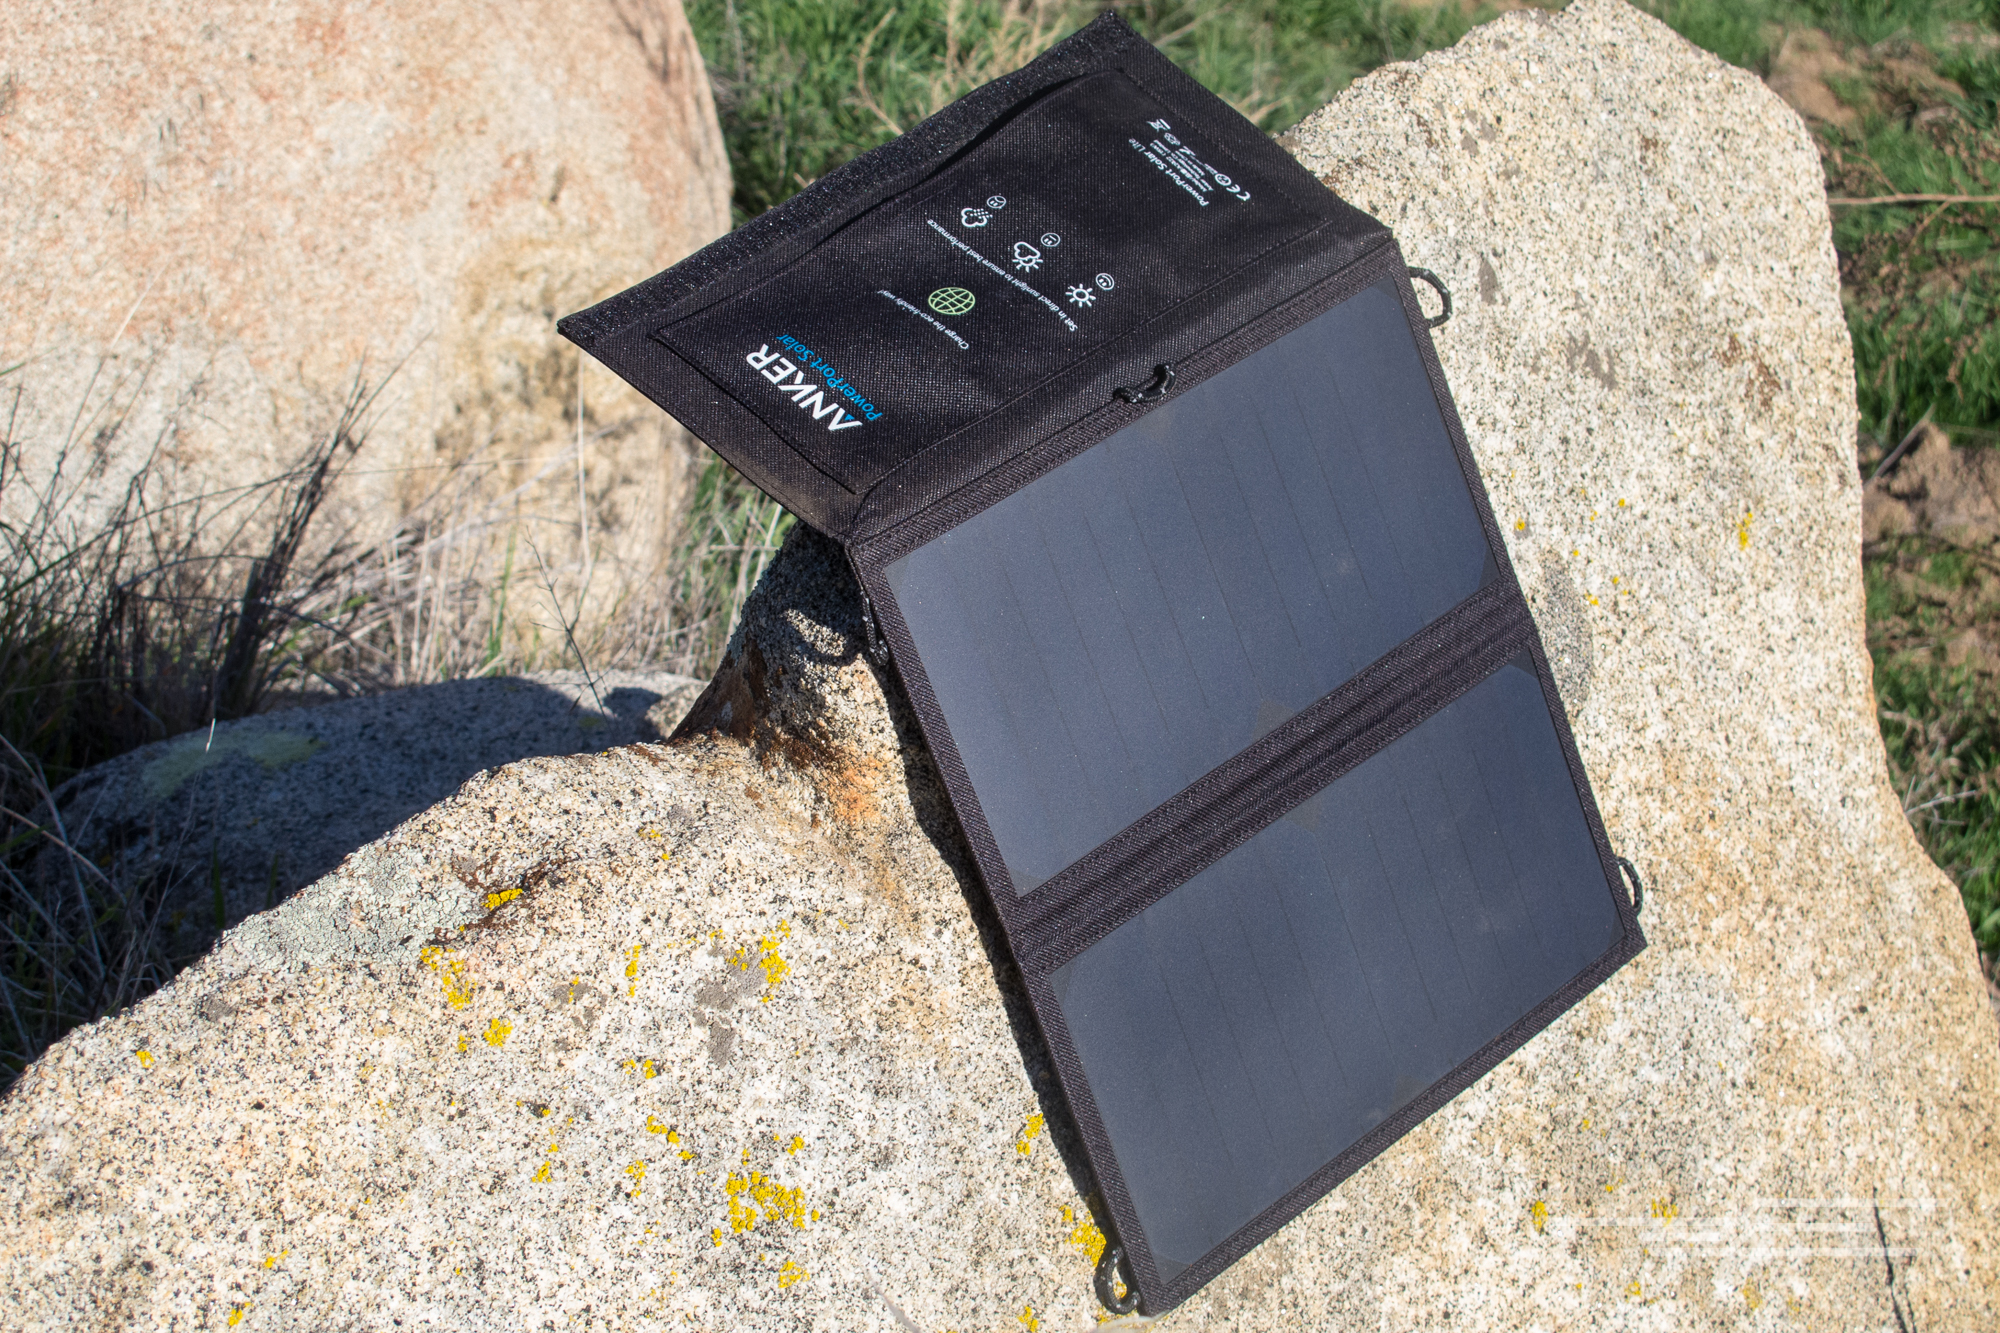 The portable solar battery charger | Engadget